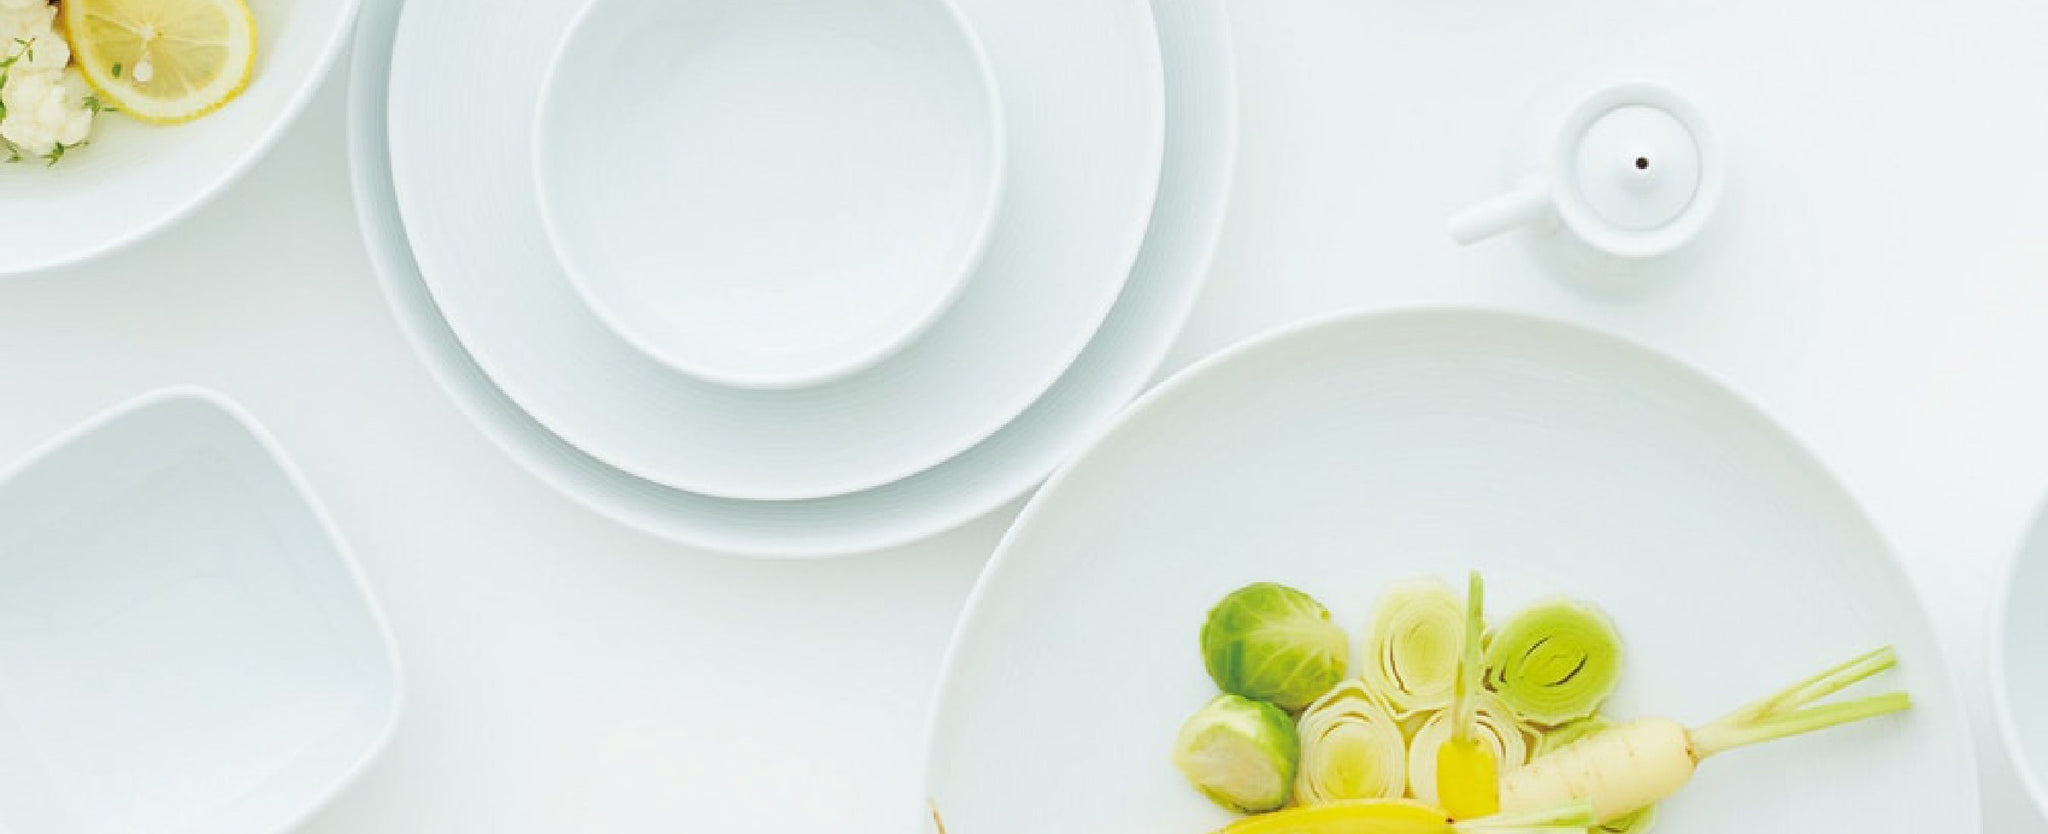 Various White Plates and Bowls on a White Background.  The bowl in the foreground has roots and sprouts in it. 